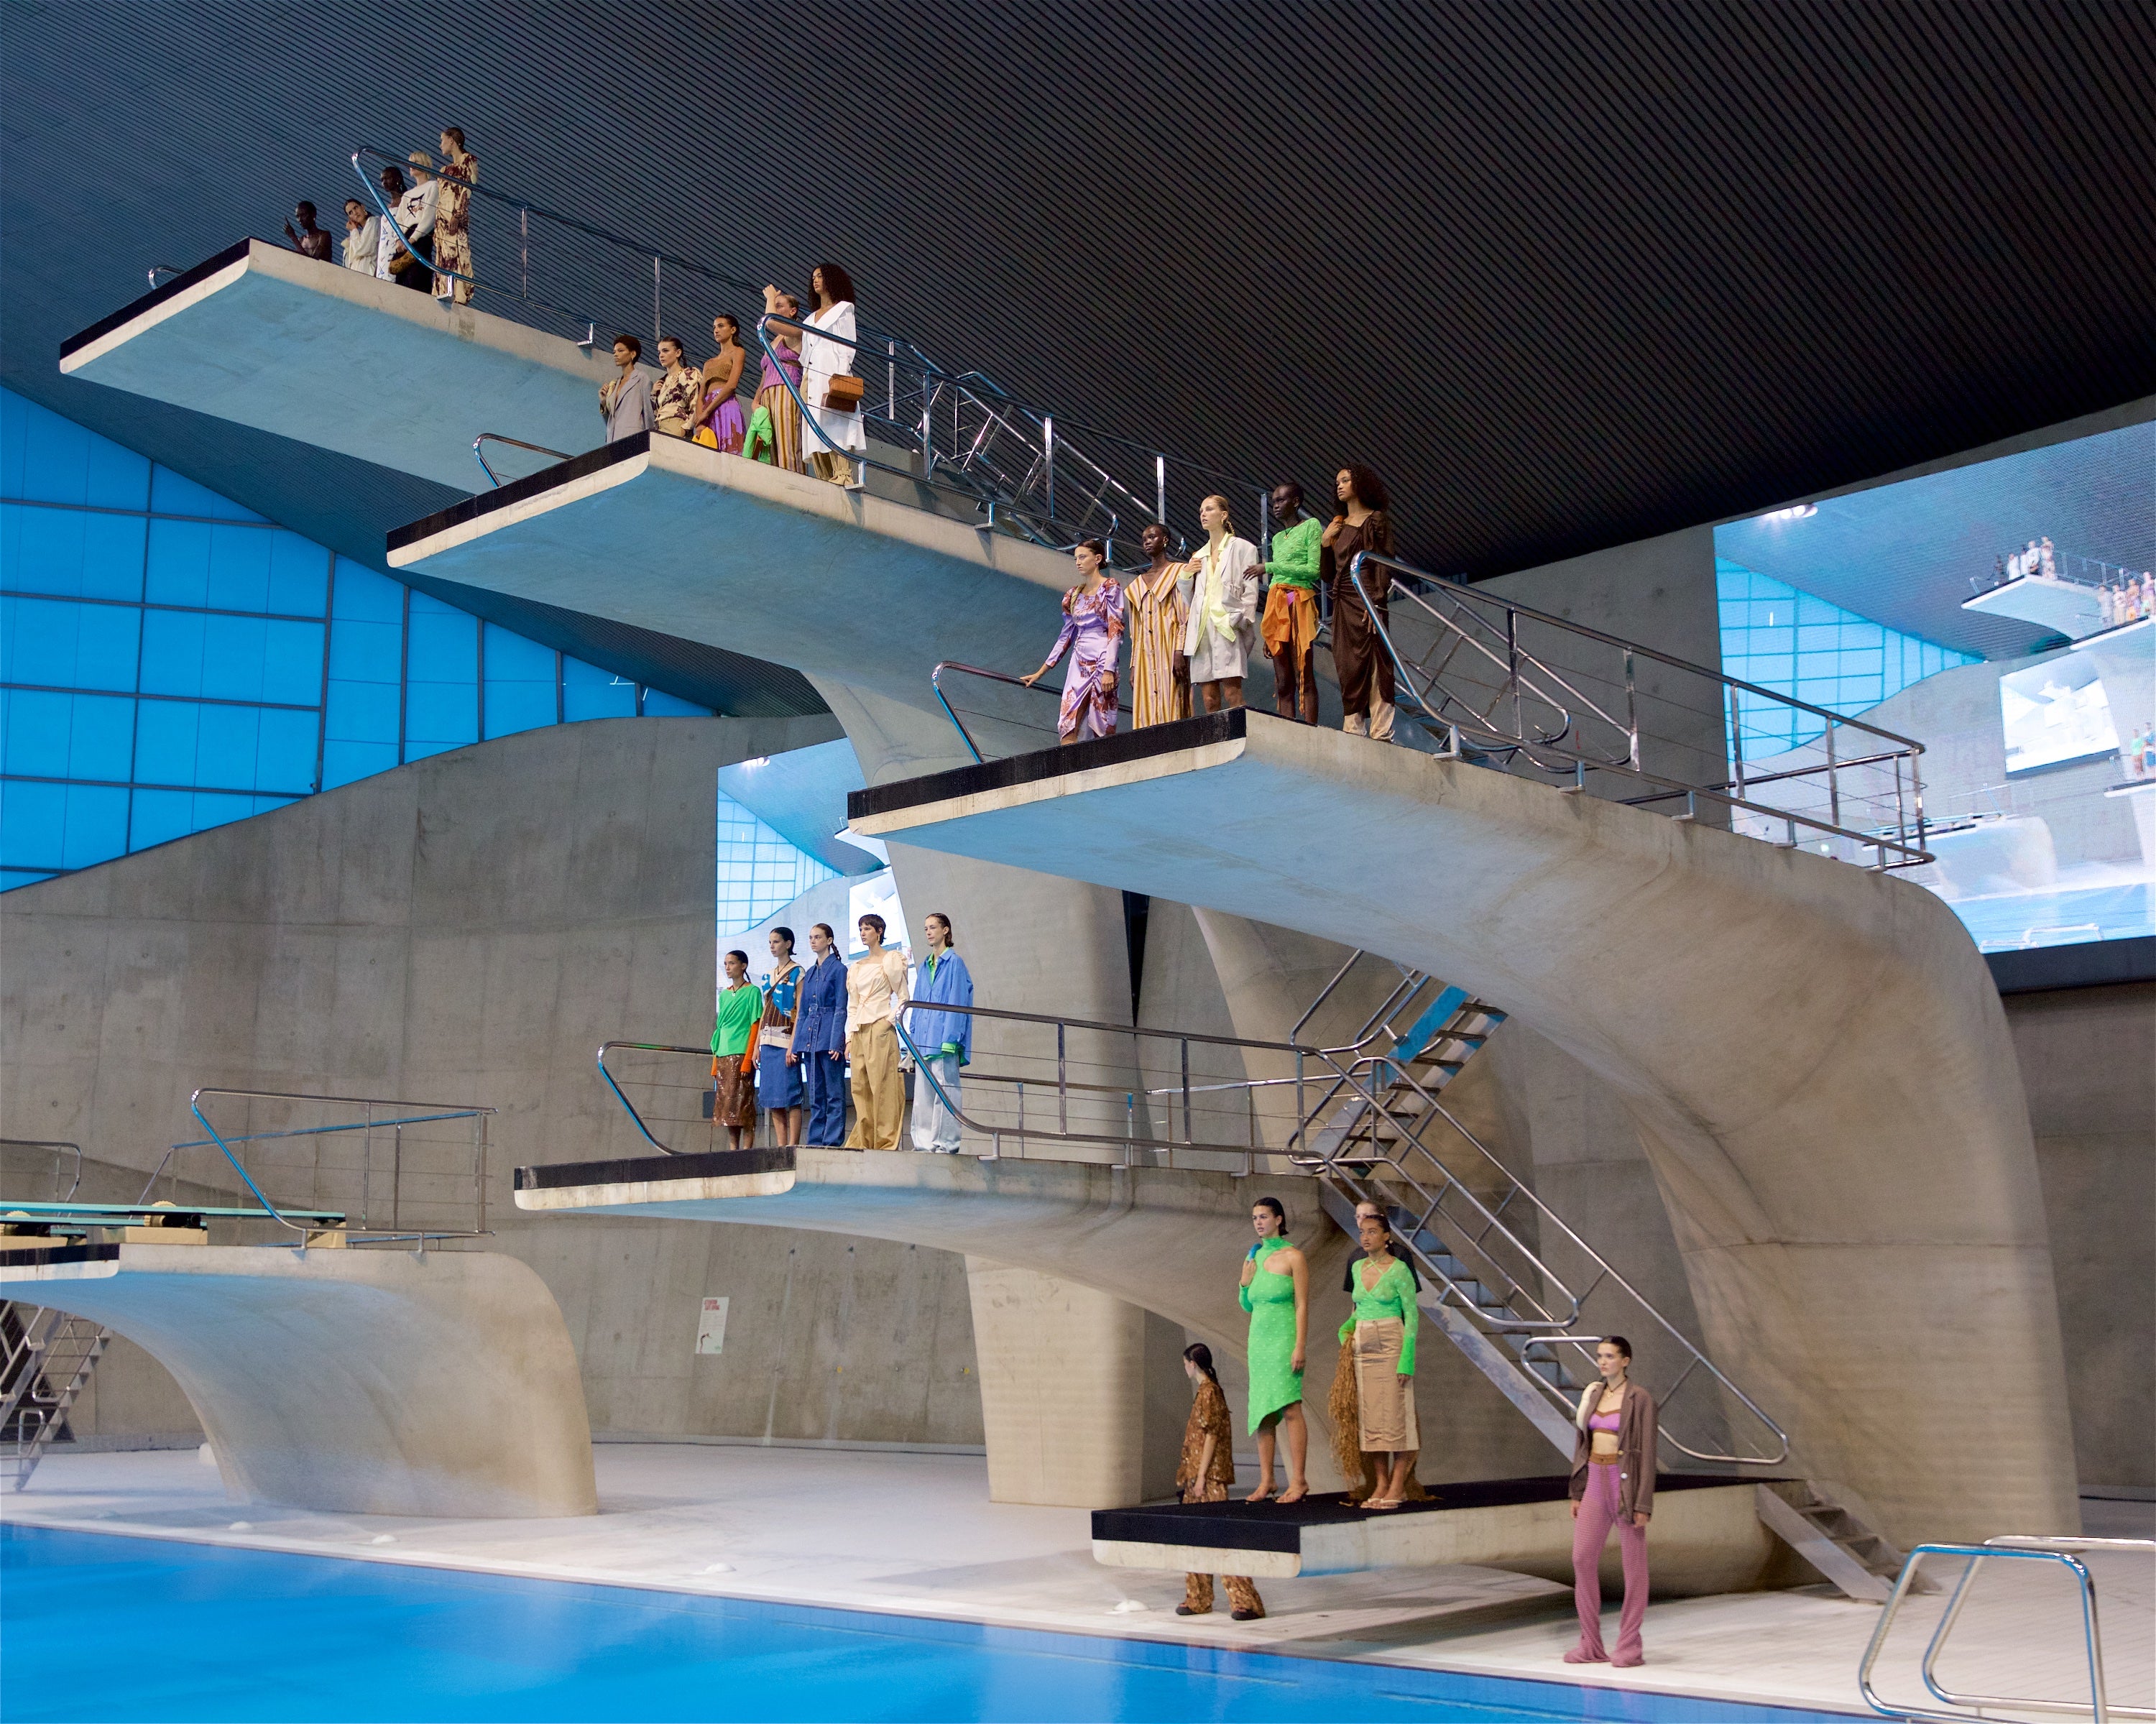 Rejina Pyo staged her SS22 collection at the London Aquatics Centre.